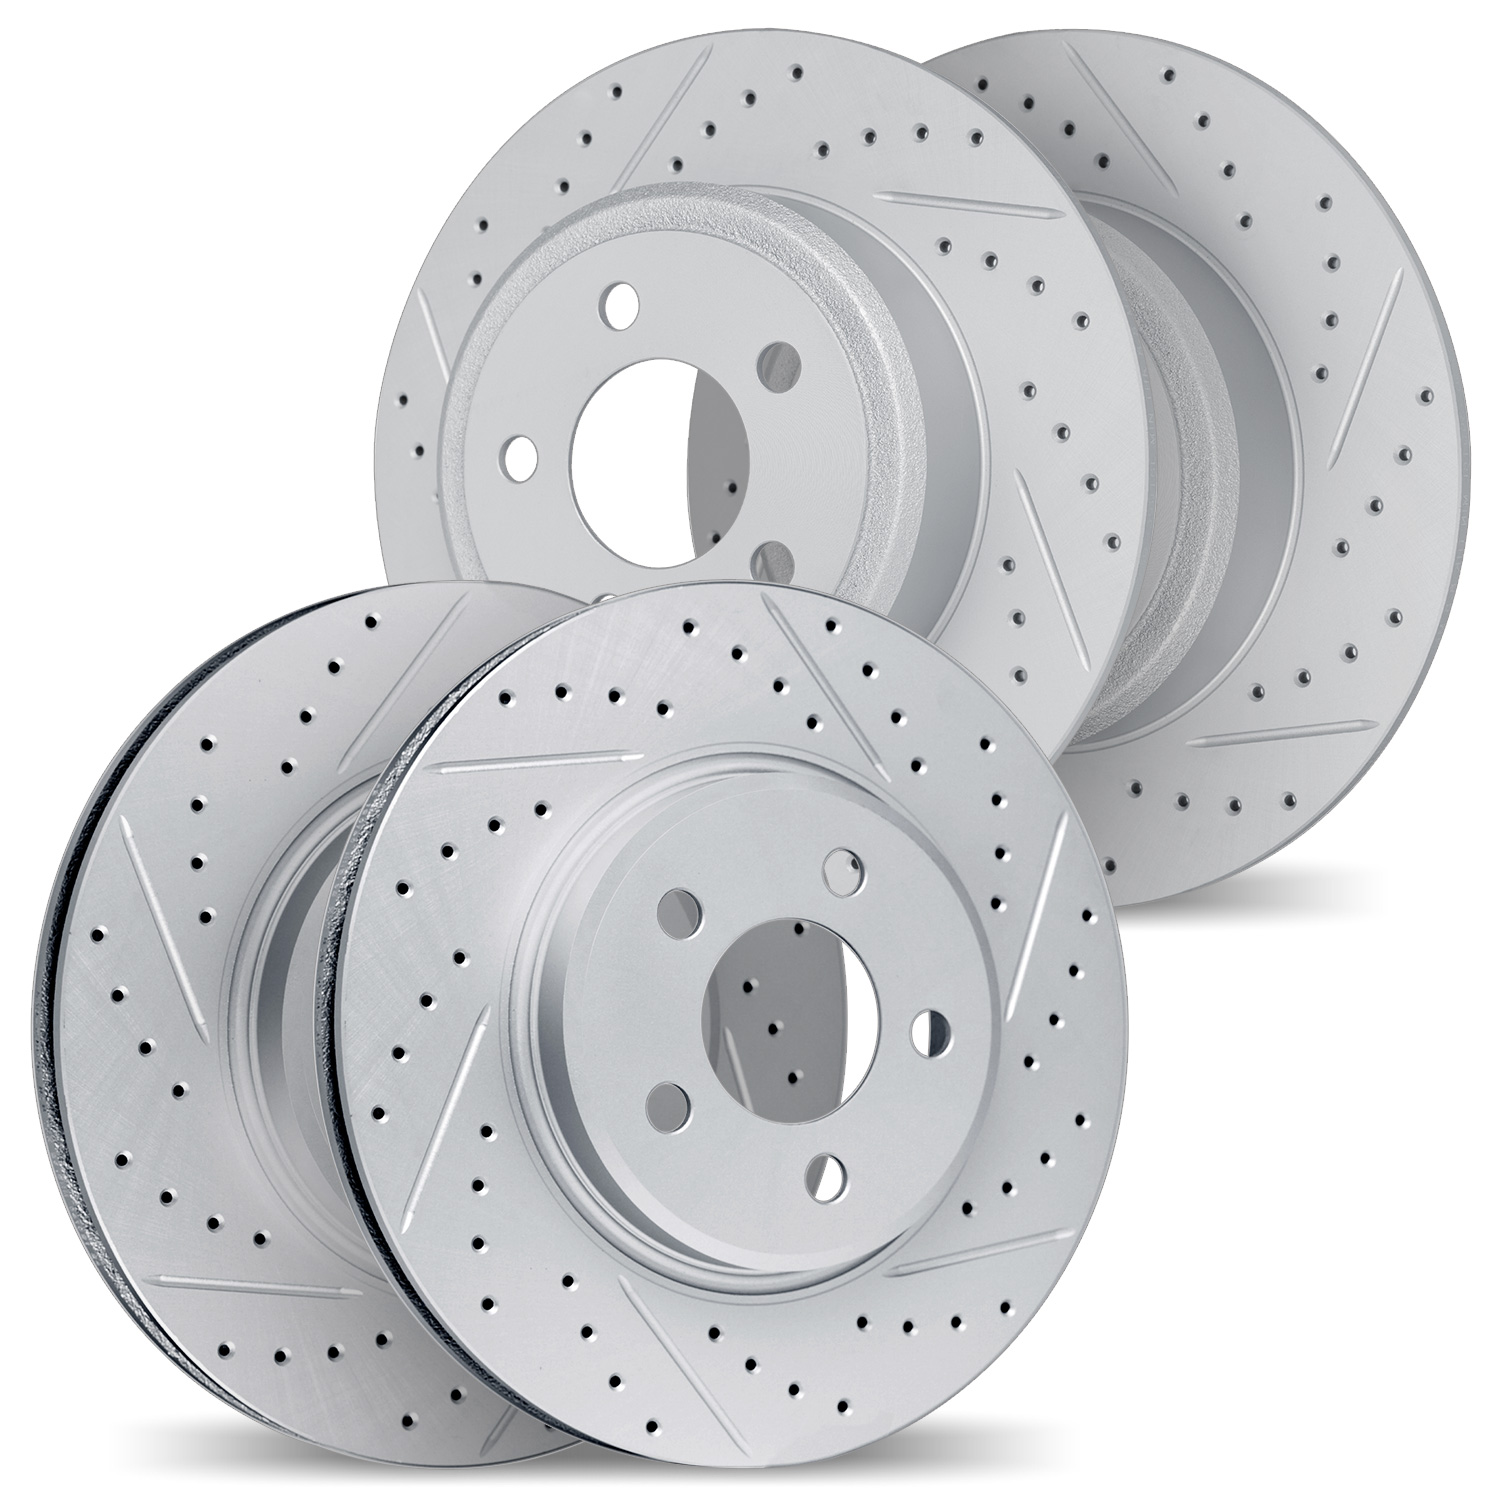 2004-59002 Geoperformance Drilled/Slotted Brake Rotors, 2006-2015 Acura/Honda, Position: Front and Rear